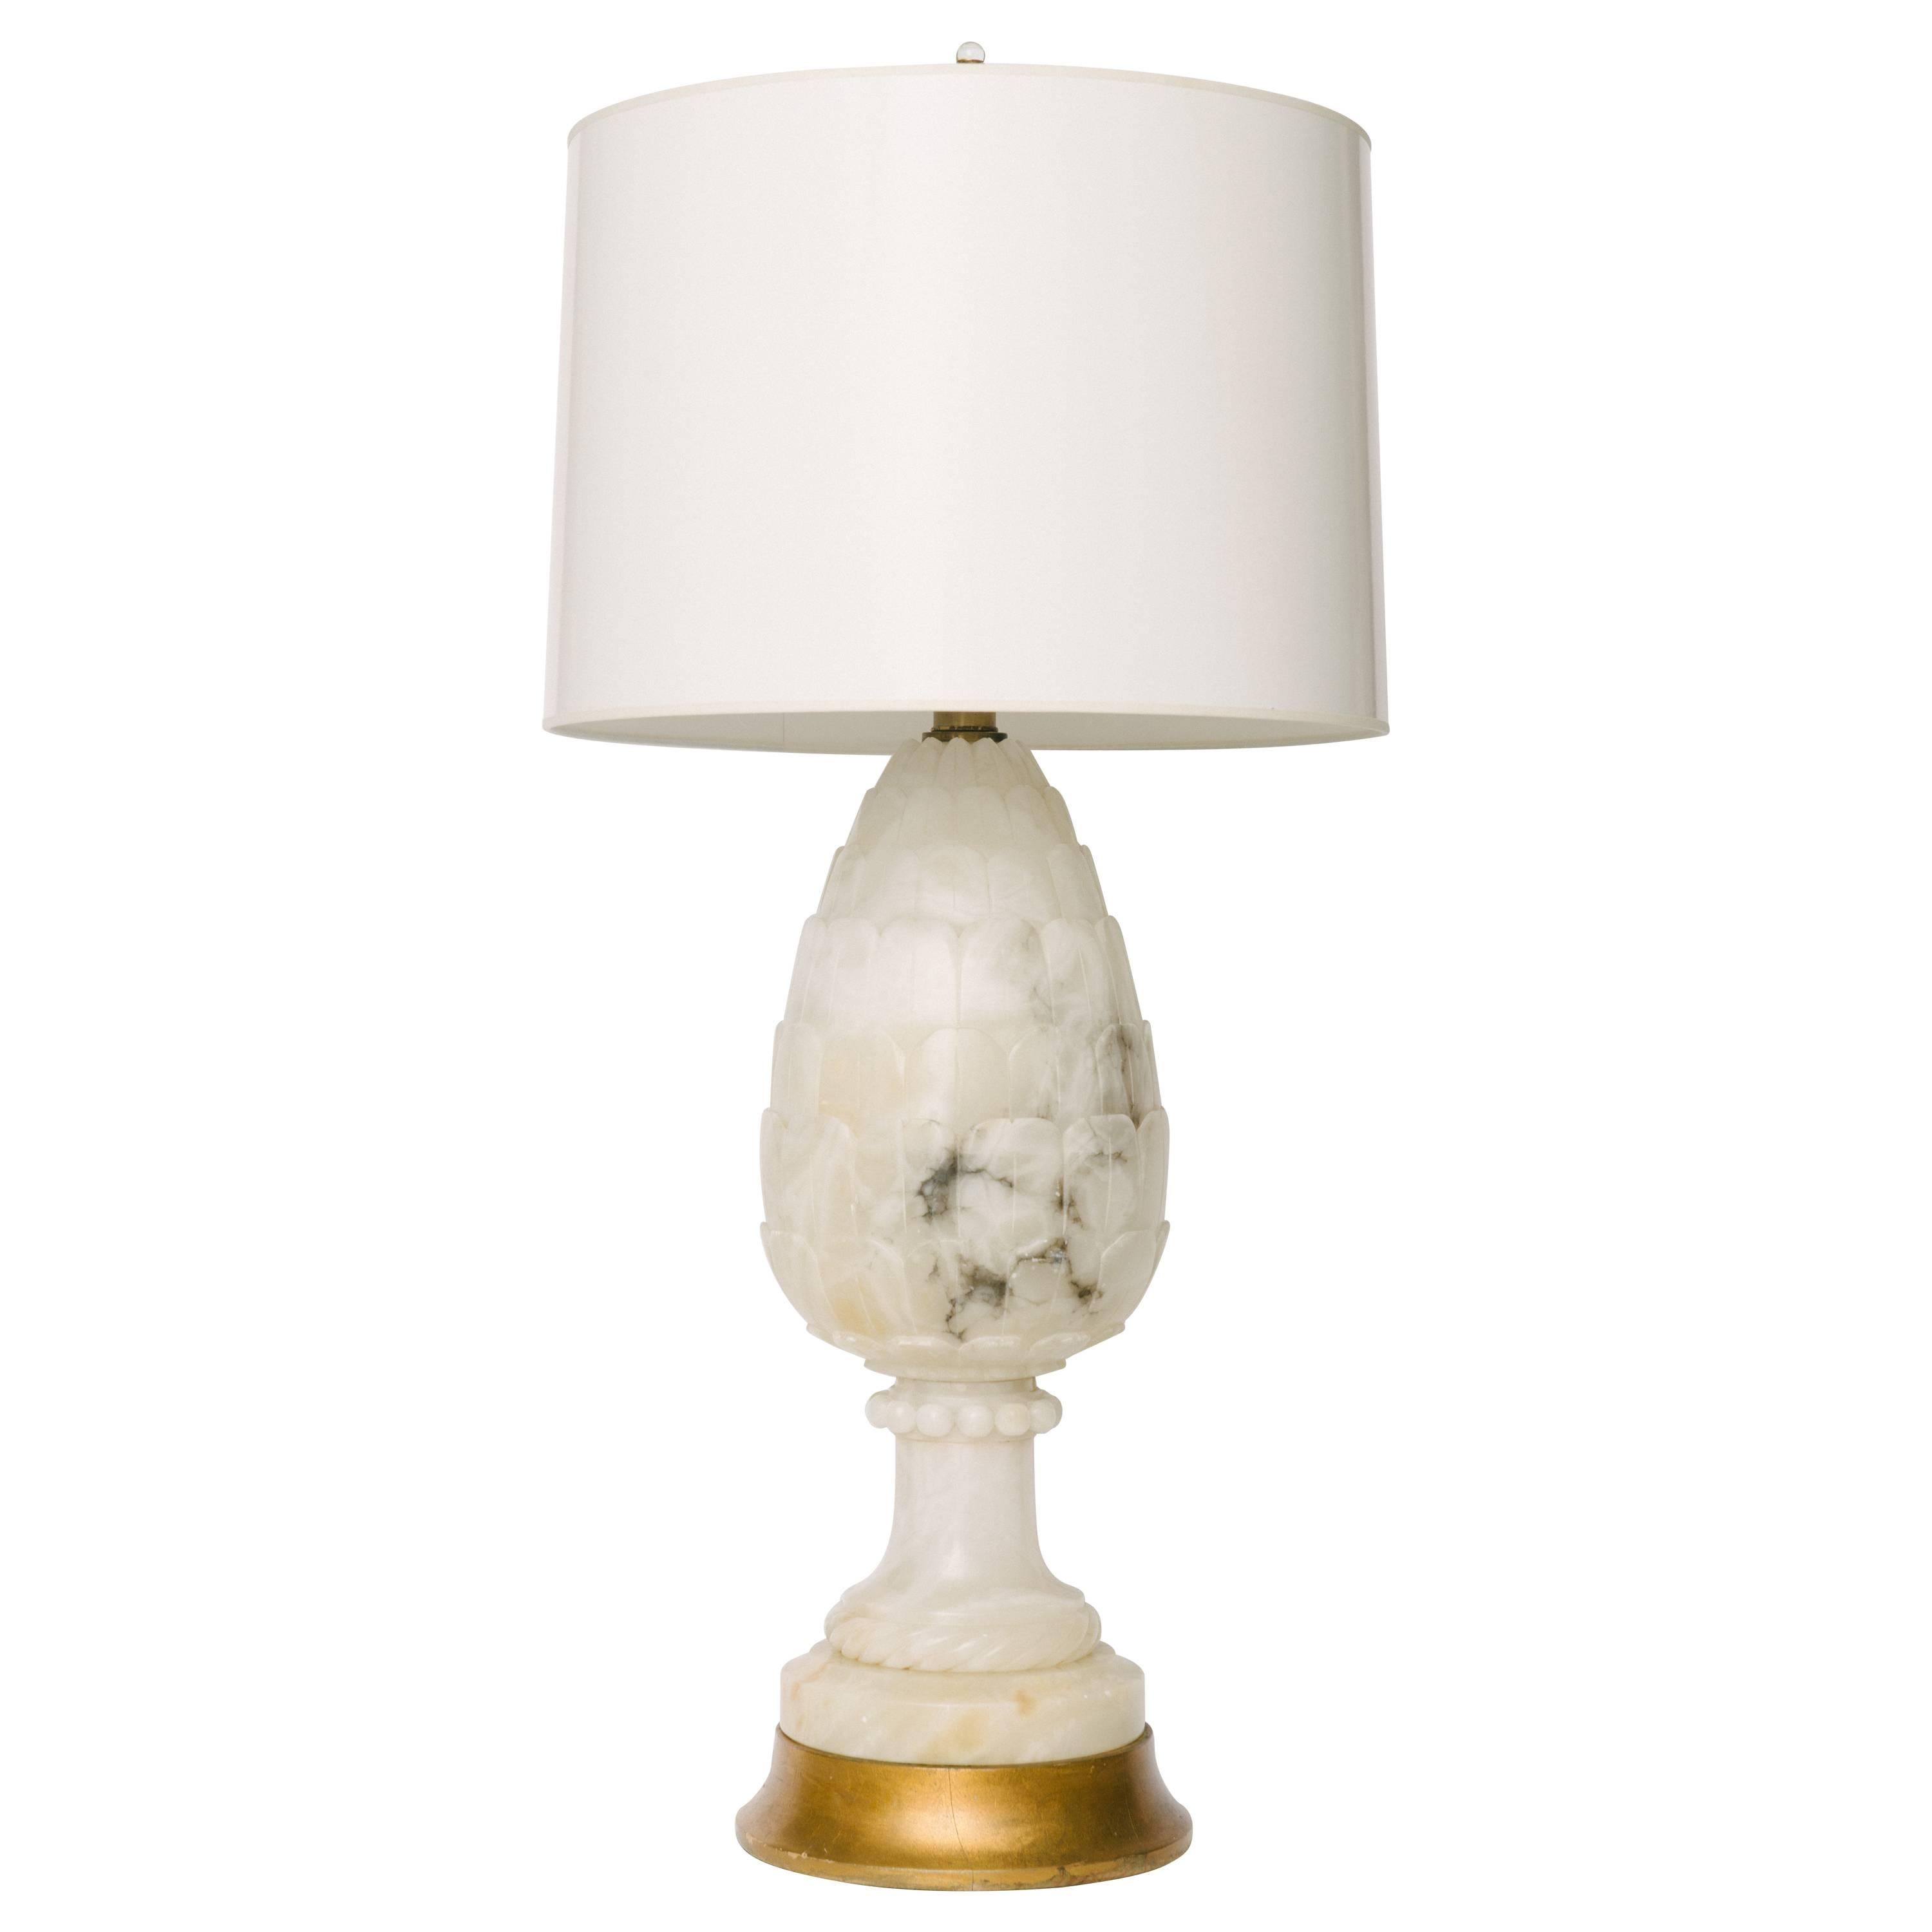 Hand-Carved Pineapple Alabaster Marble Lamp